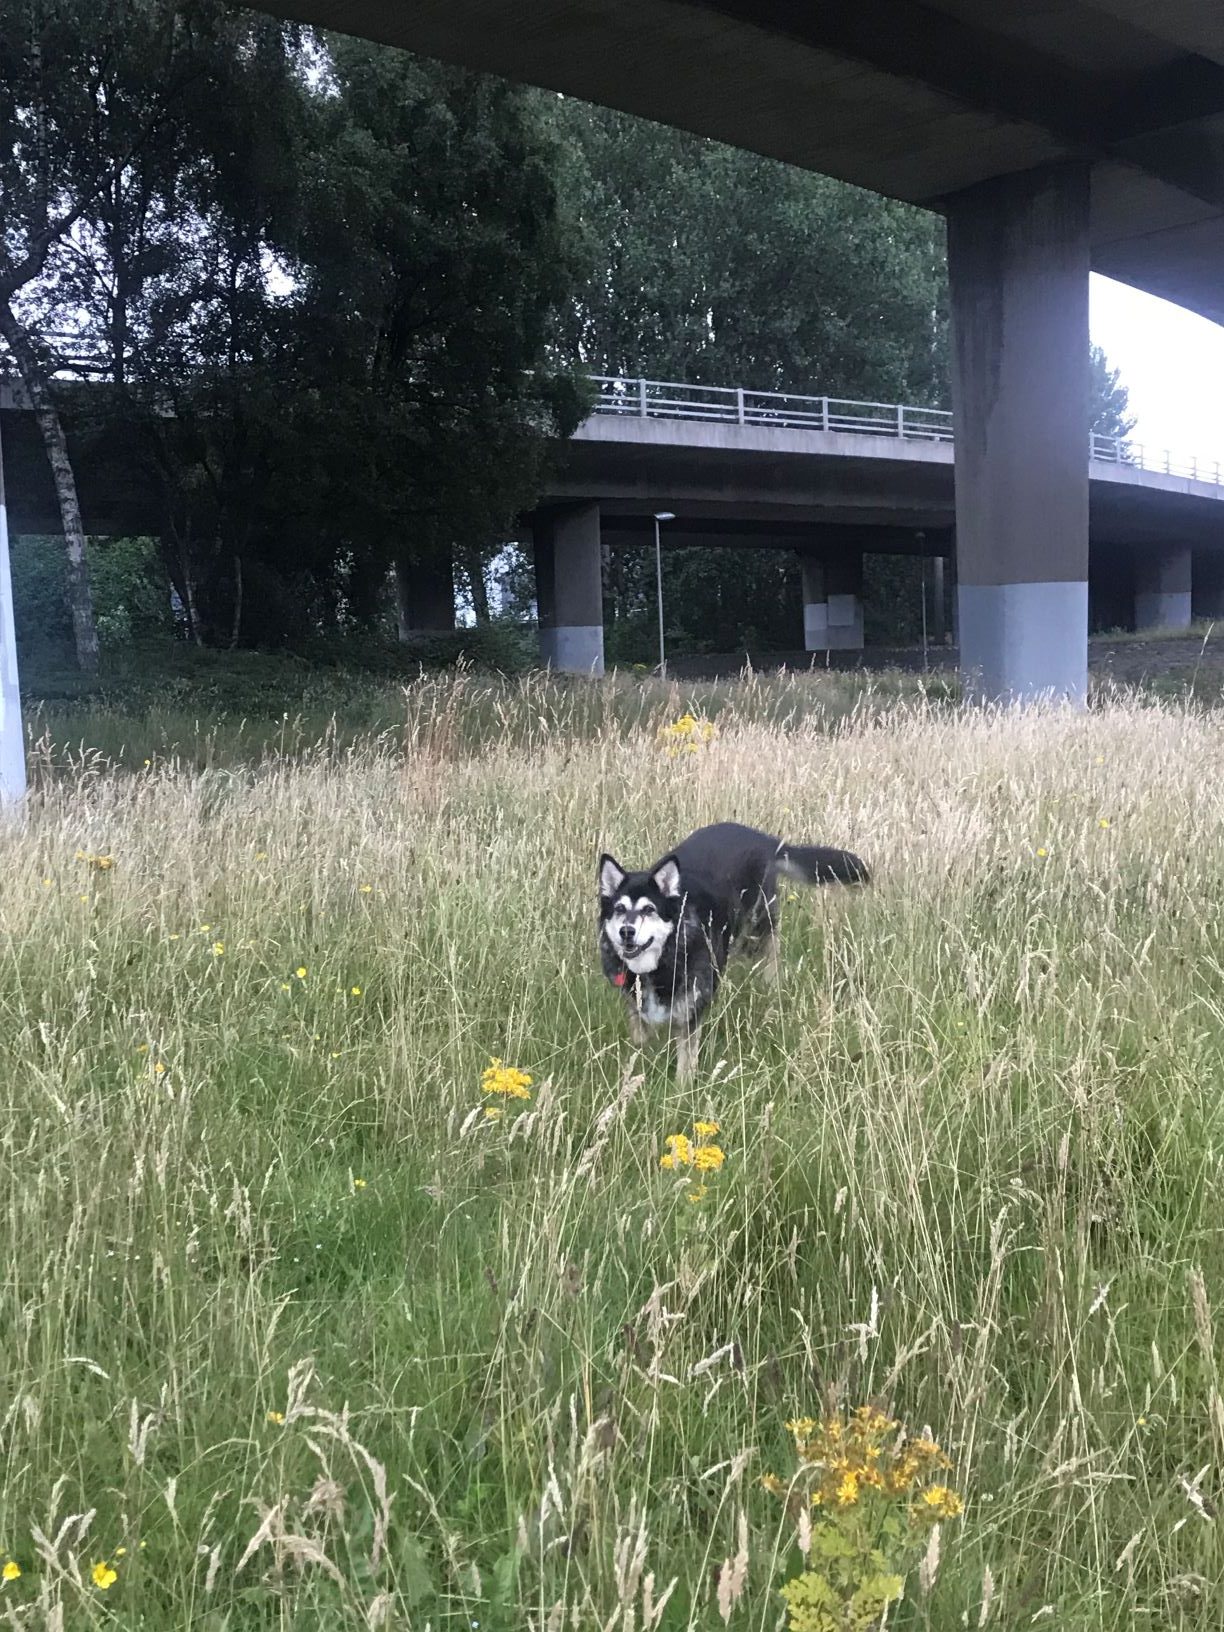 The image shows Raksha coming closer. She is a mid-sized mix of German Shepard and Husky, with black fur, white cheeks and eyebrows, and some white on her chest and legs. her ears are visible as white triangles with black outlines. She is in a field of green and tan grass with some golden flowers and two concrete highway overpasses and some trees in the background. 